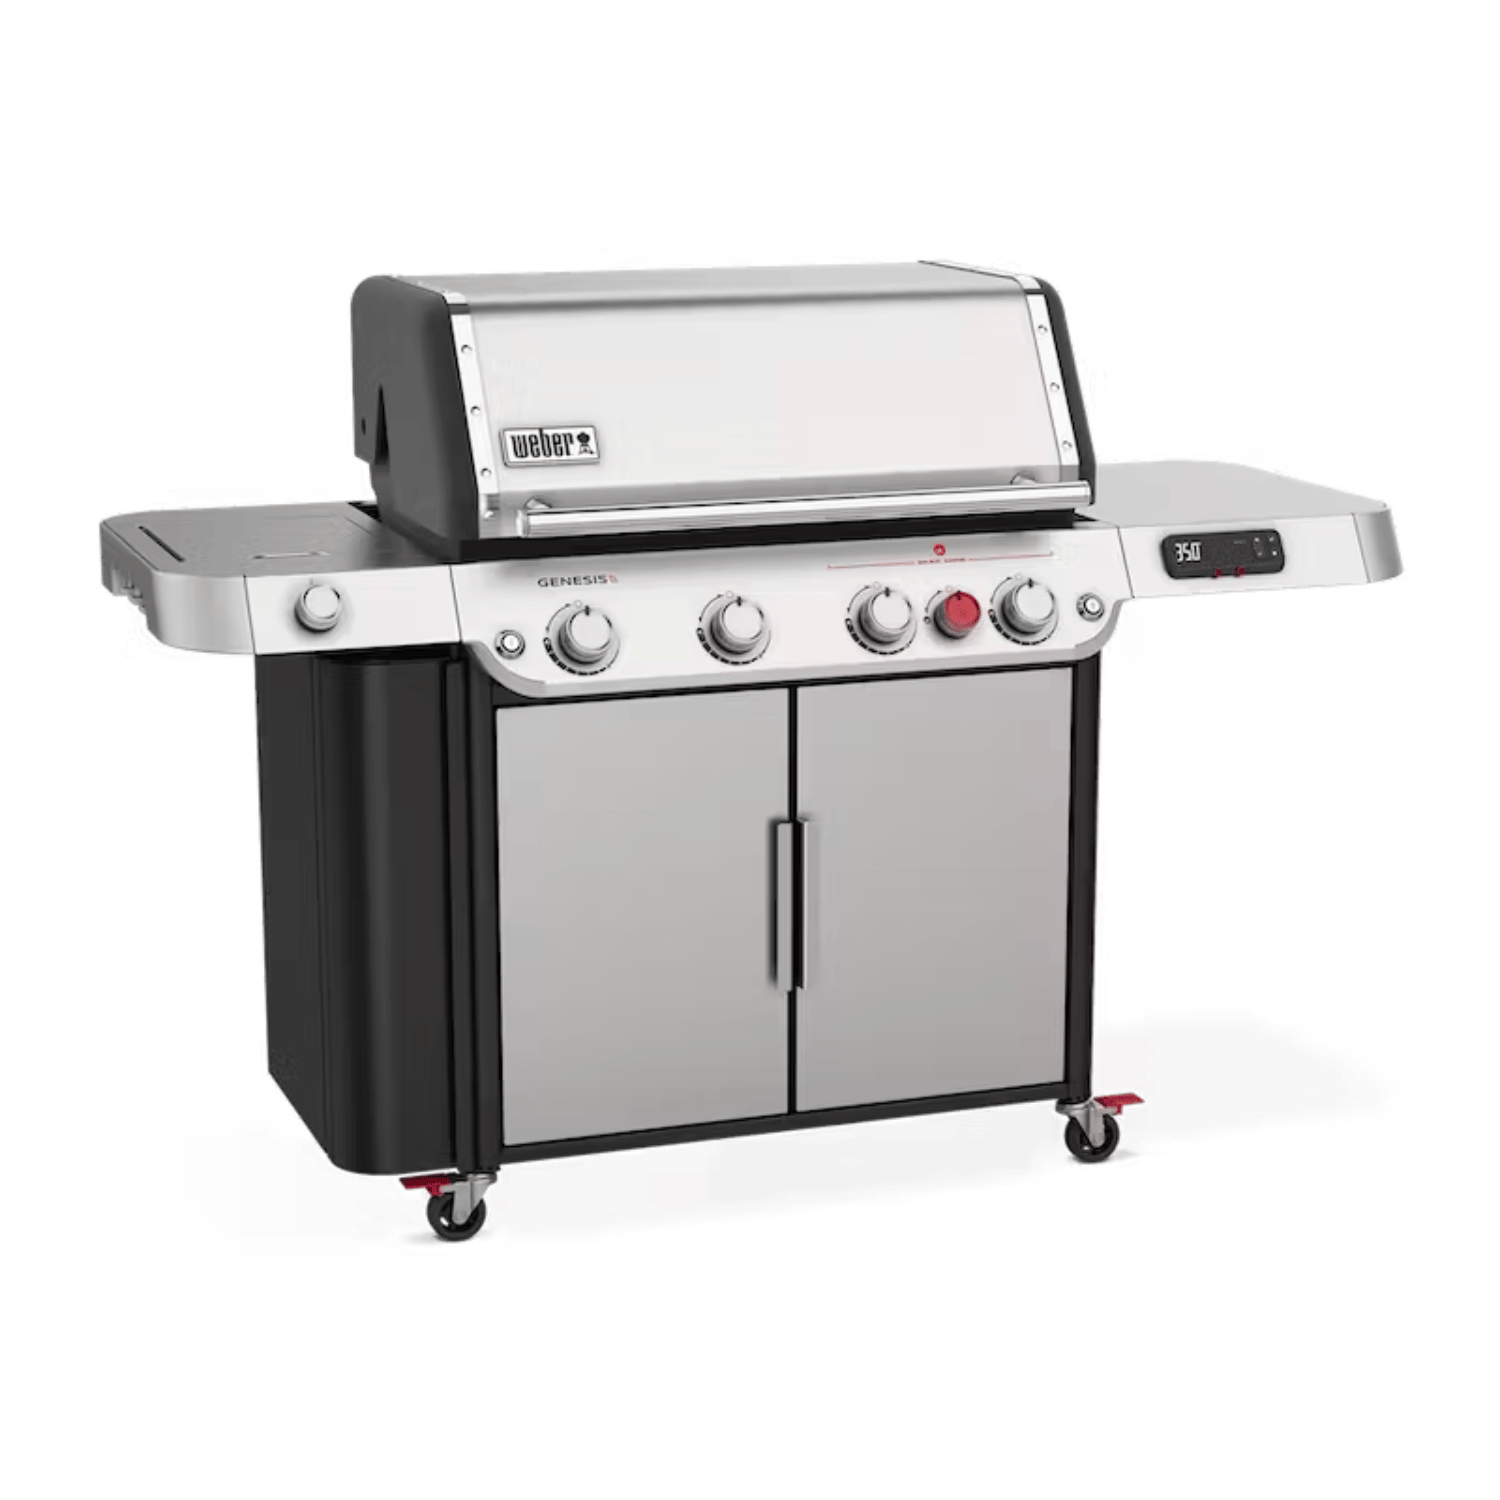 Weber Genesis SE-SPX-435 Smart Grill available at MeatKing.hk0